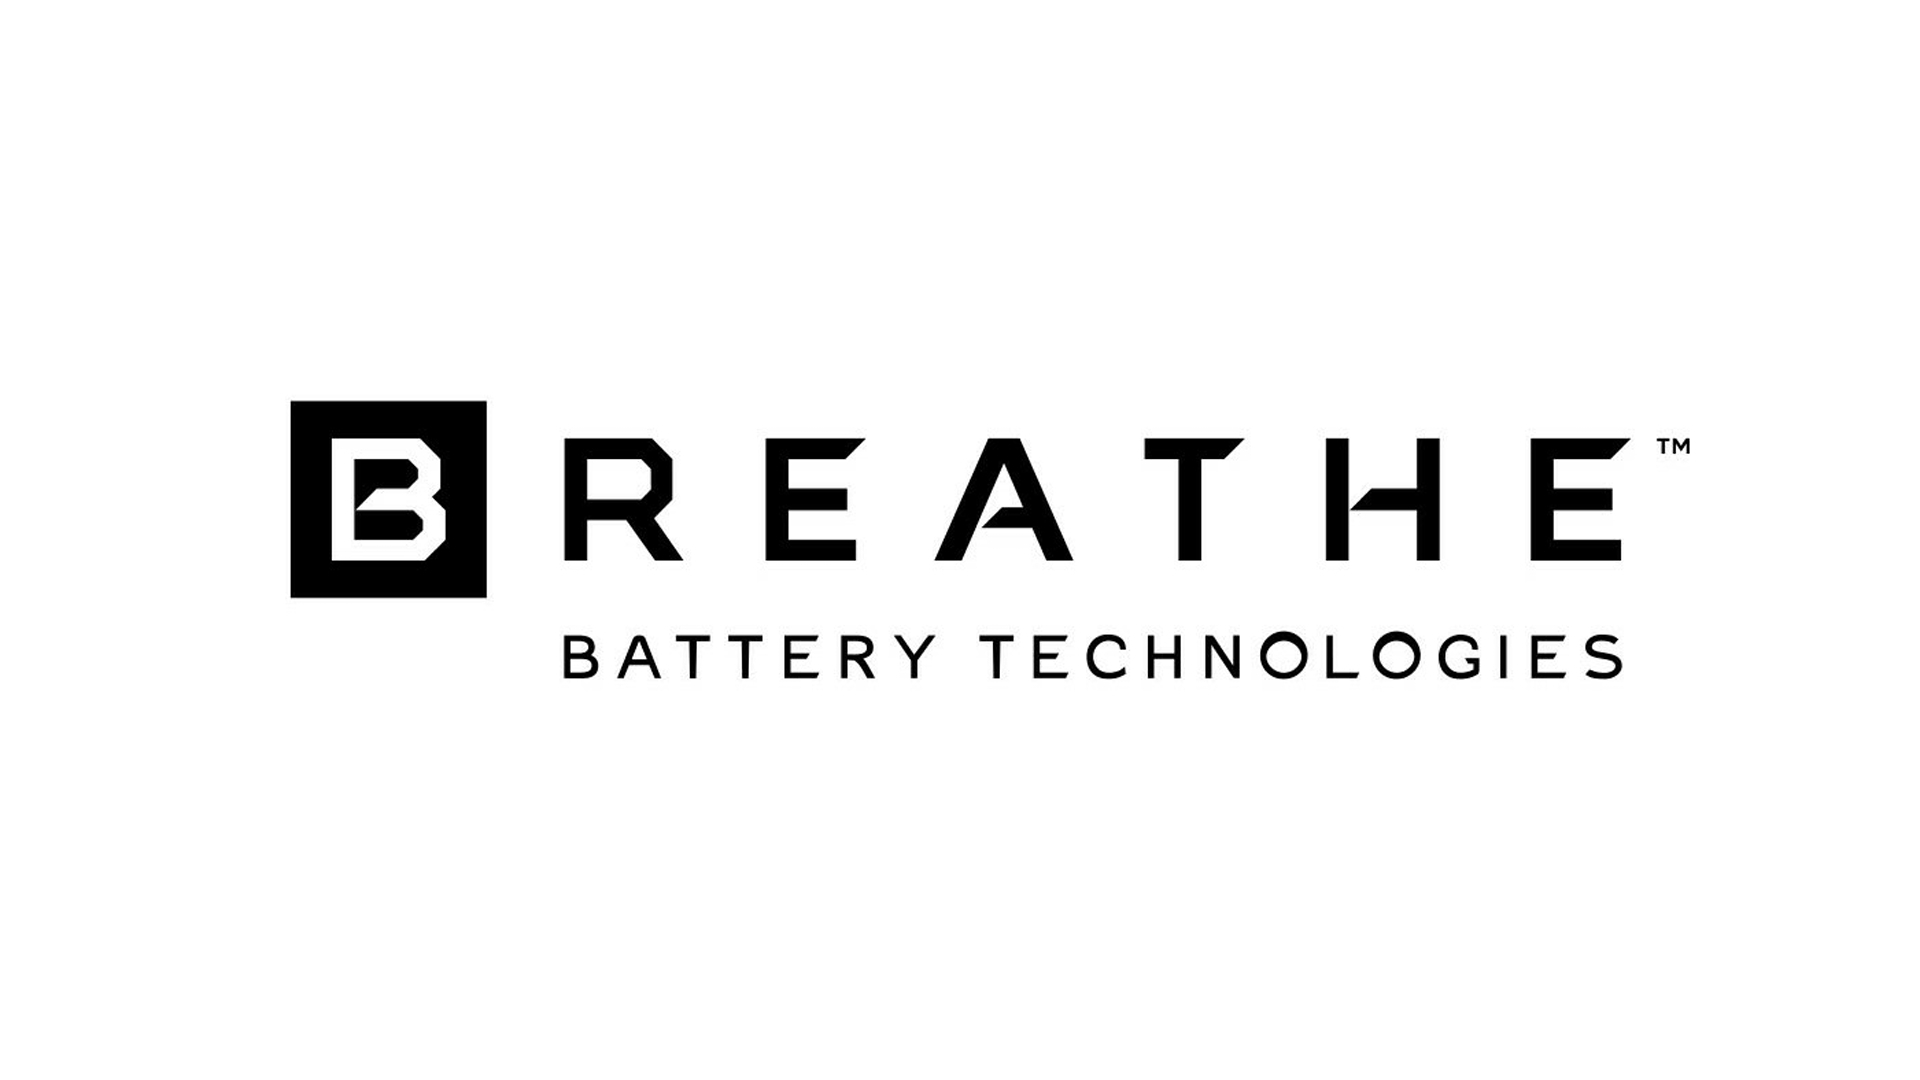 Volvo Cars Teams Up With Breathe Battery Technologies For Faster Electric Vehicle Charging